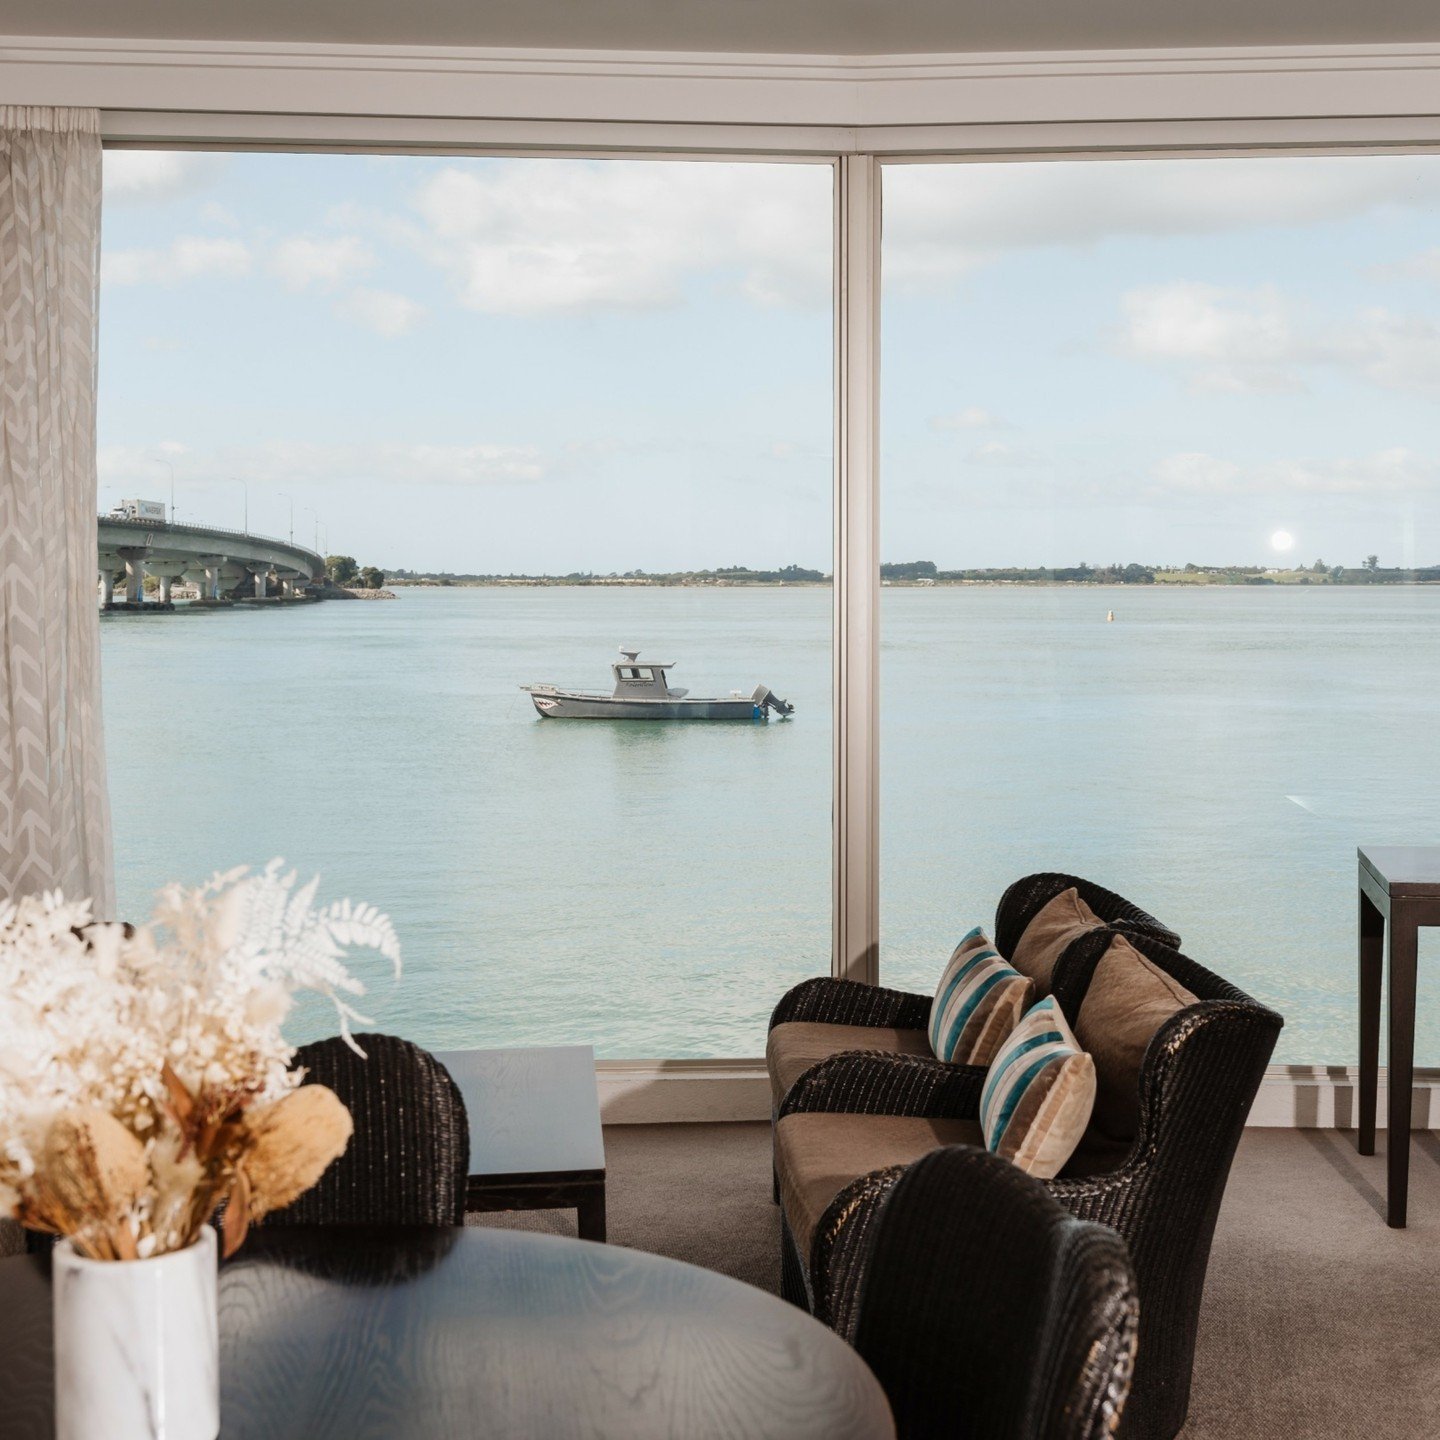 The suite life 😍 

Floor to ceiling glass windows run the entire length of this unique and spacious open plan suite. Positioned out and over the water, the Trinity Wharf Suite is truly a magical experience.
.
.
.
#travelnz #newzealand #purenewzealan